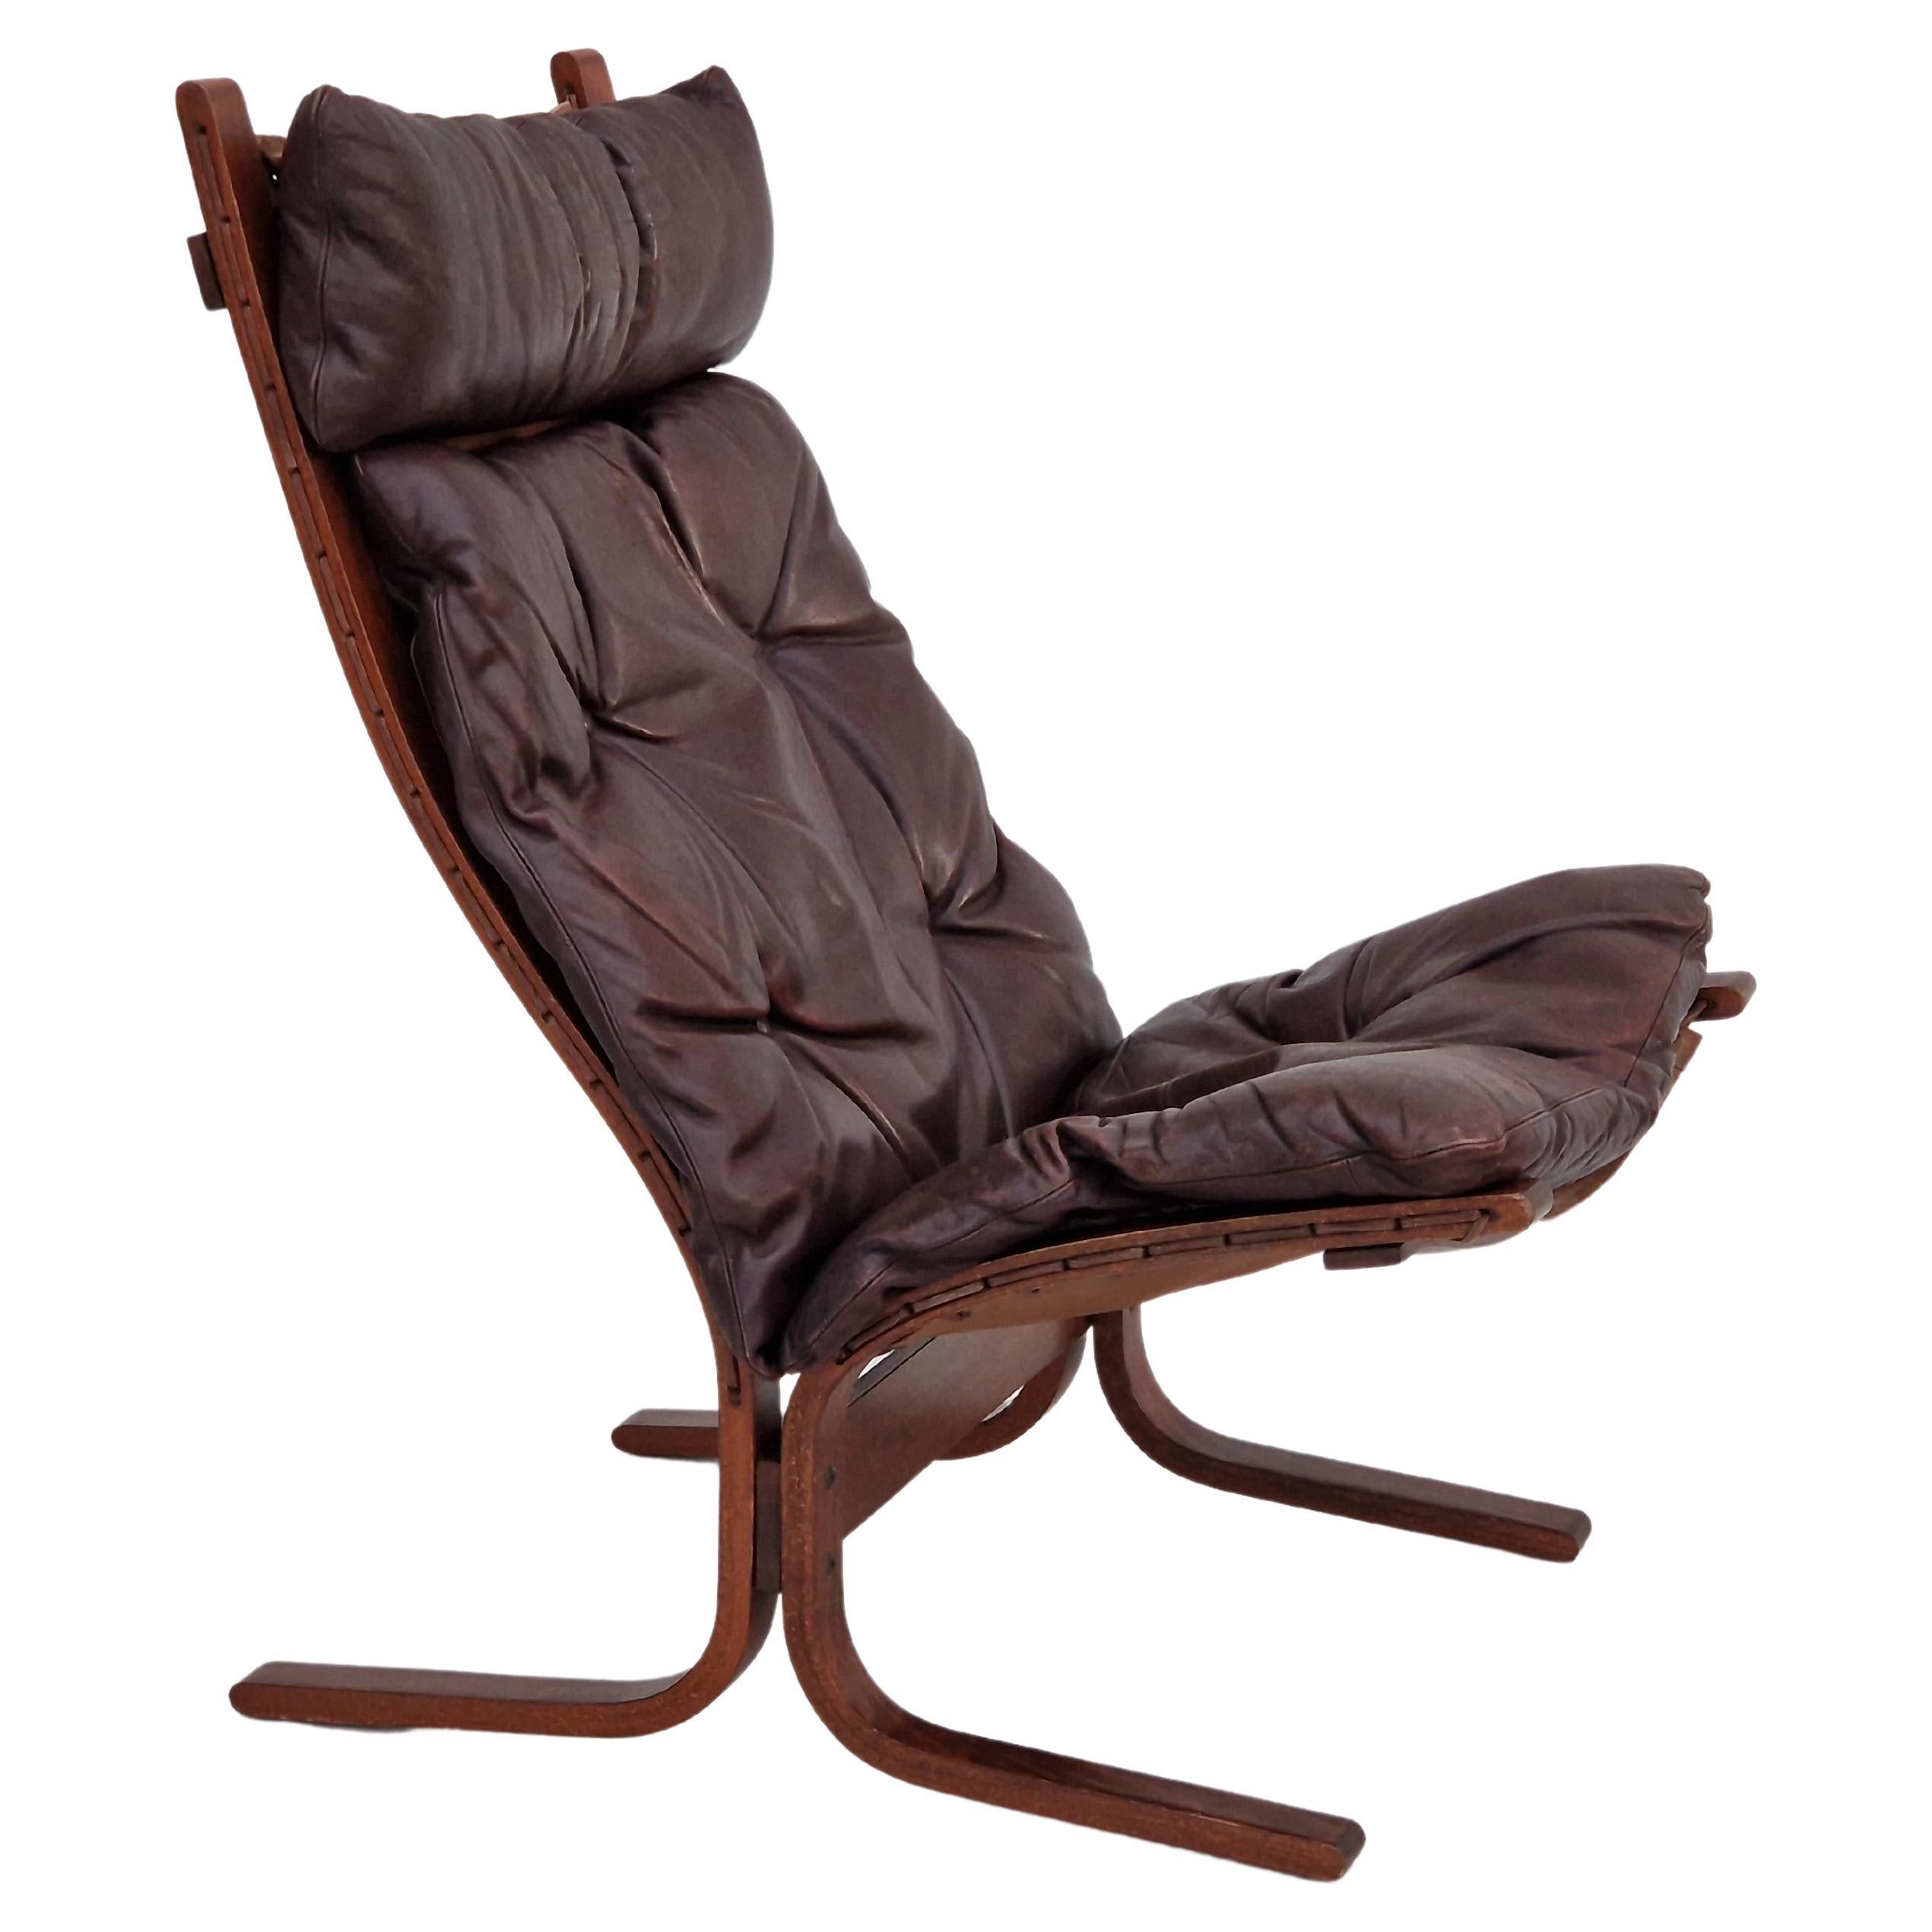 1960’s, Norwegian Design, "Siesta" Lounge Chair by Ingmar Relling, Leather